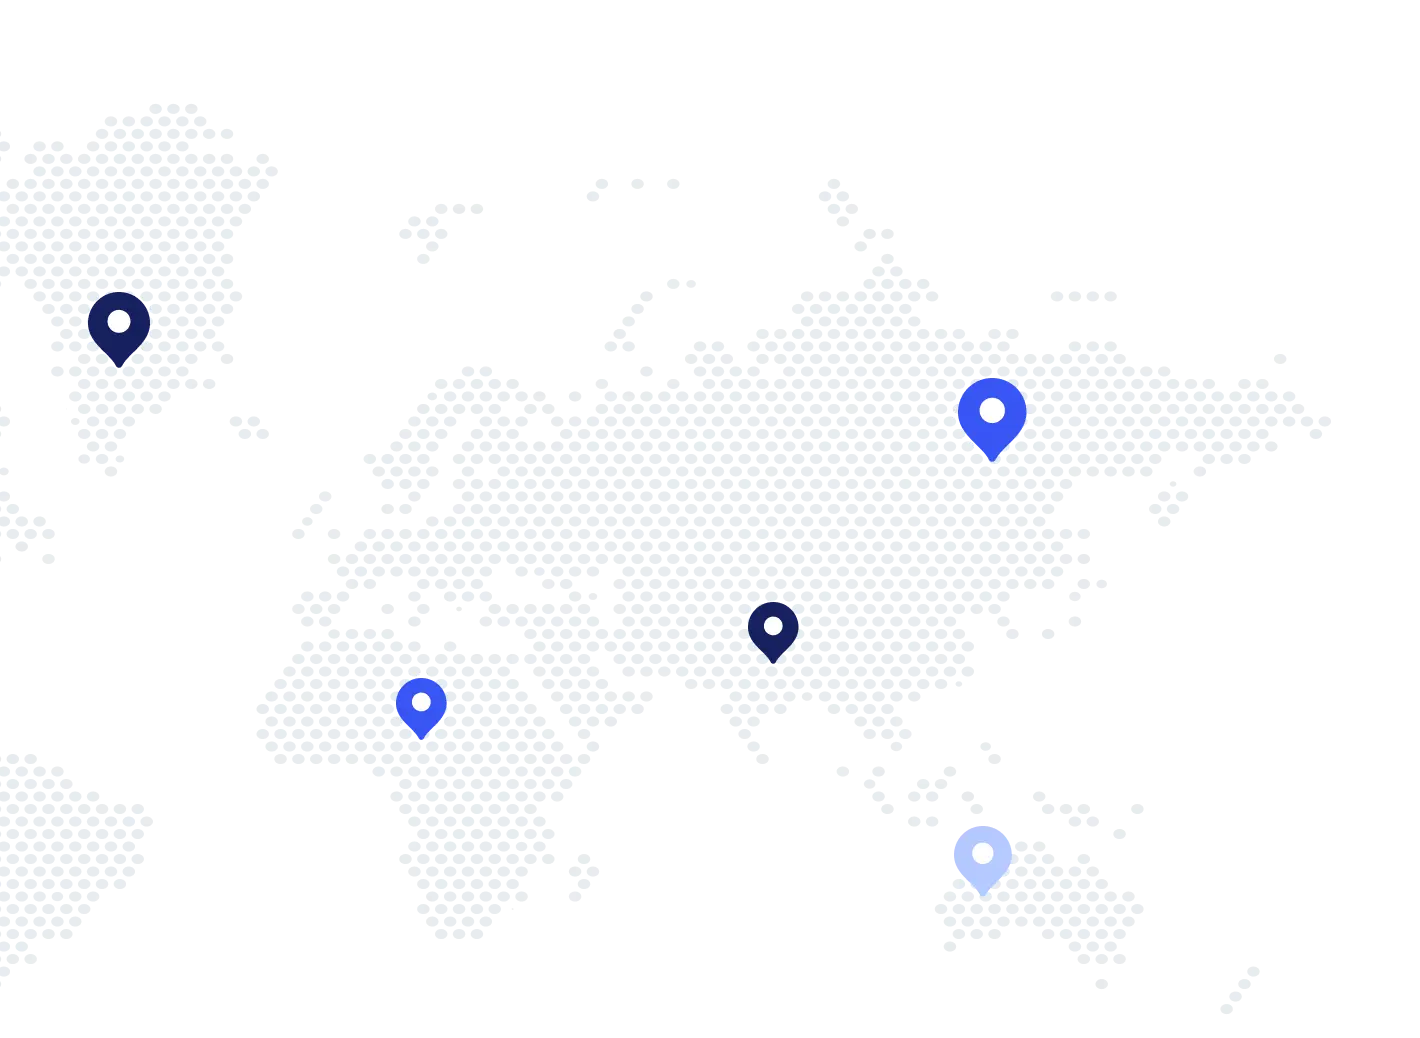 A world map with blue dots indicating locations.